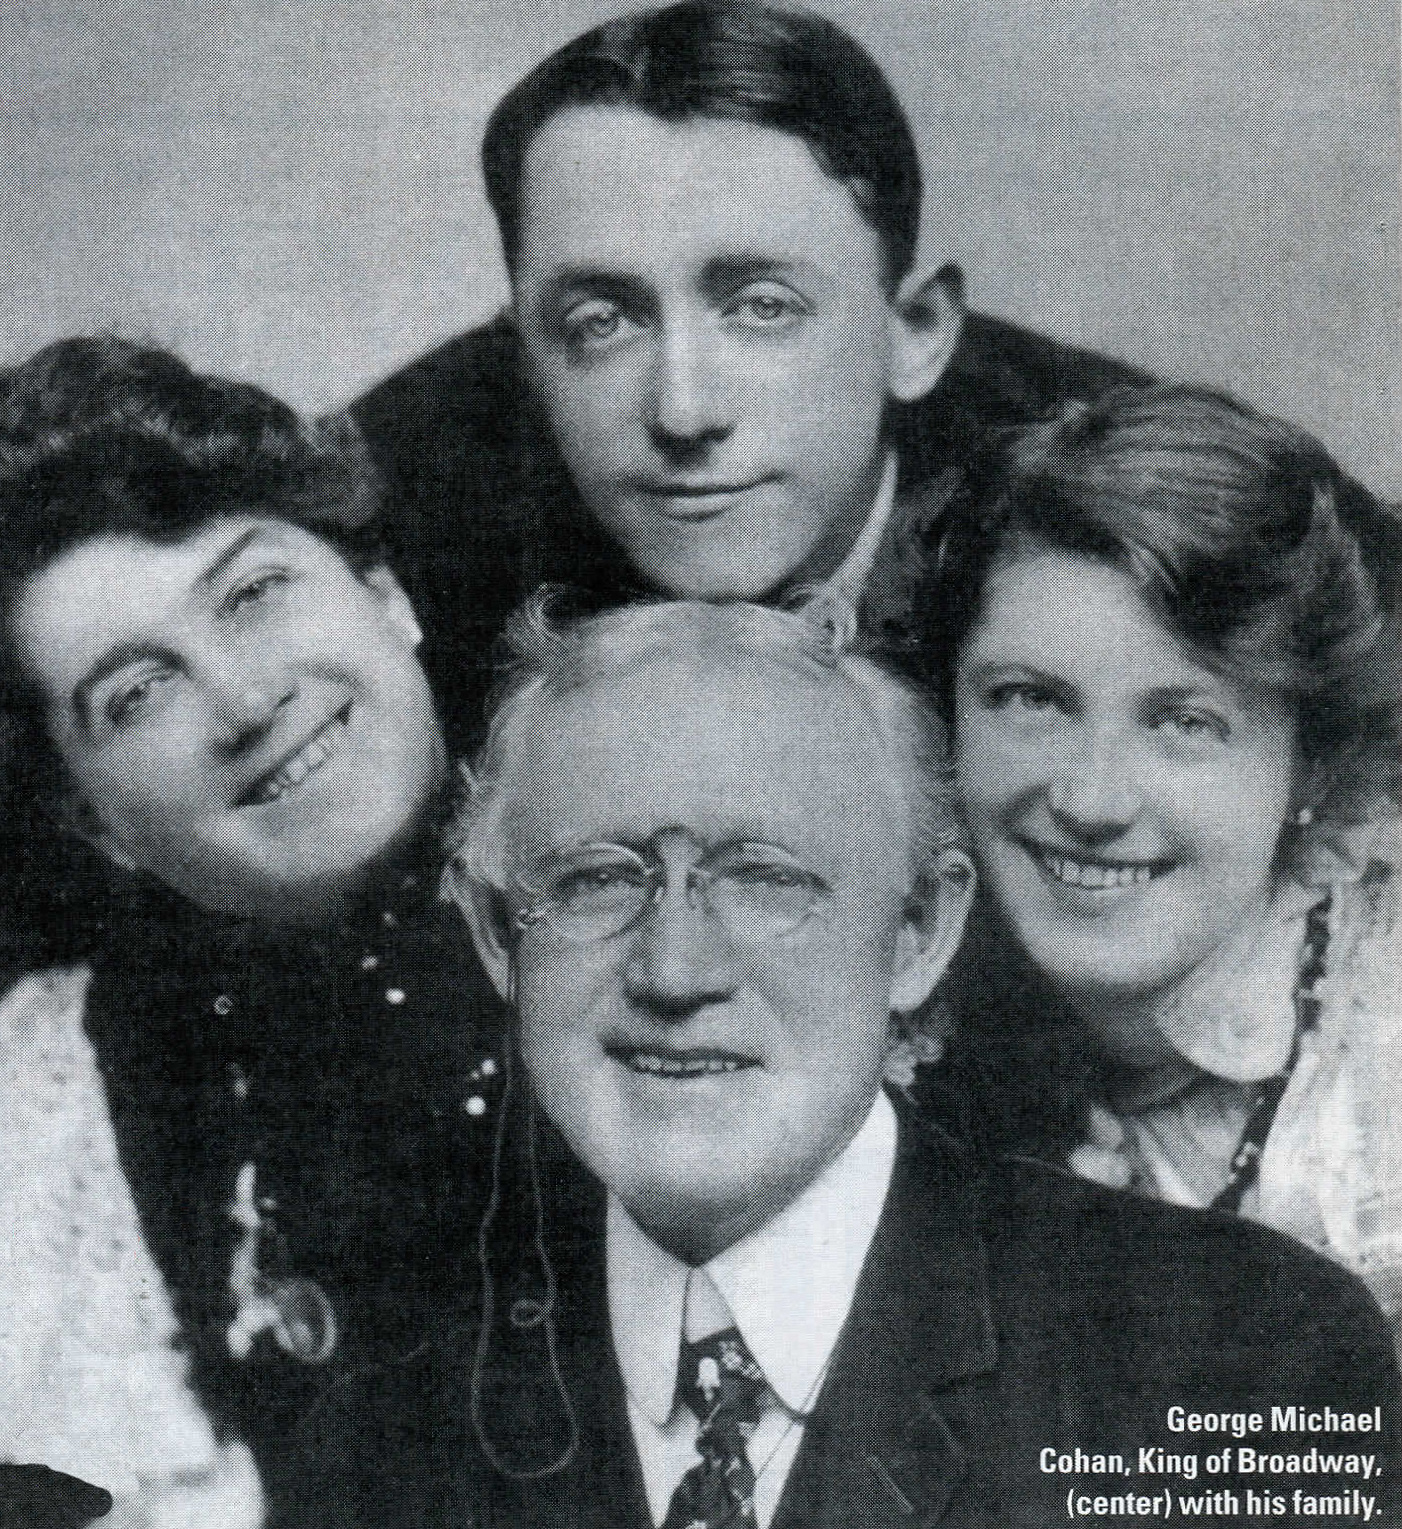 George Michael Cohan, King of Broadway, center, with his family.